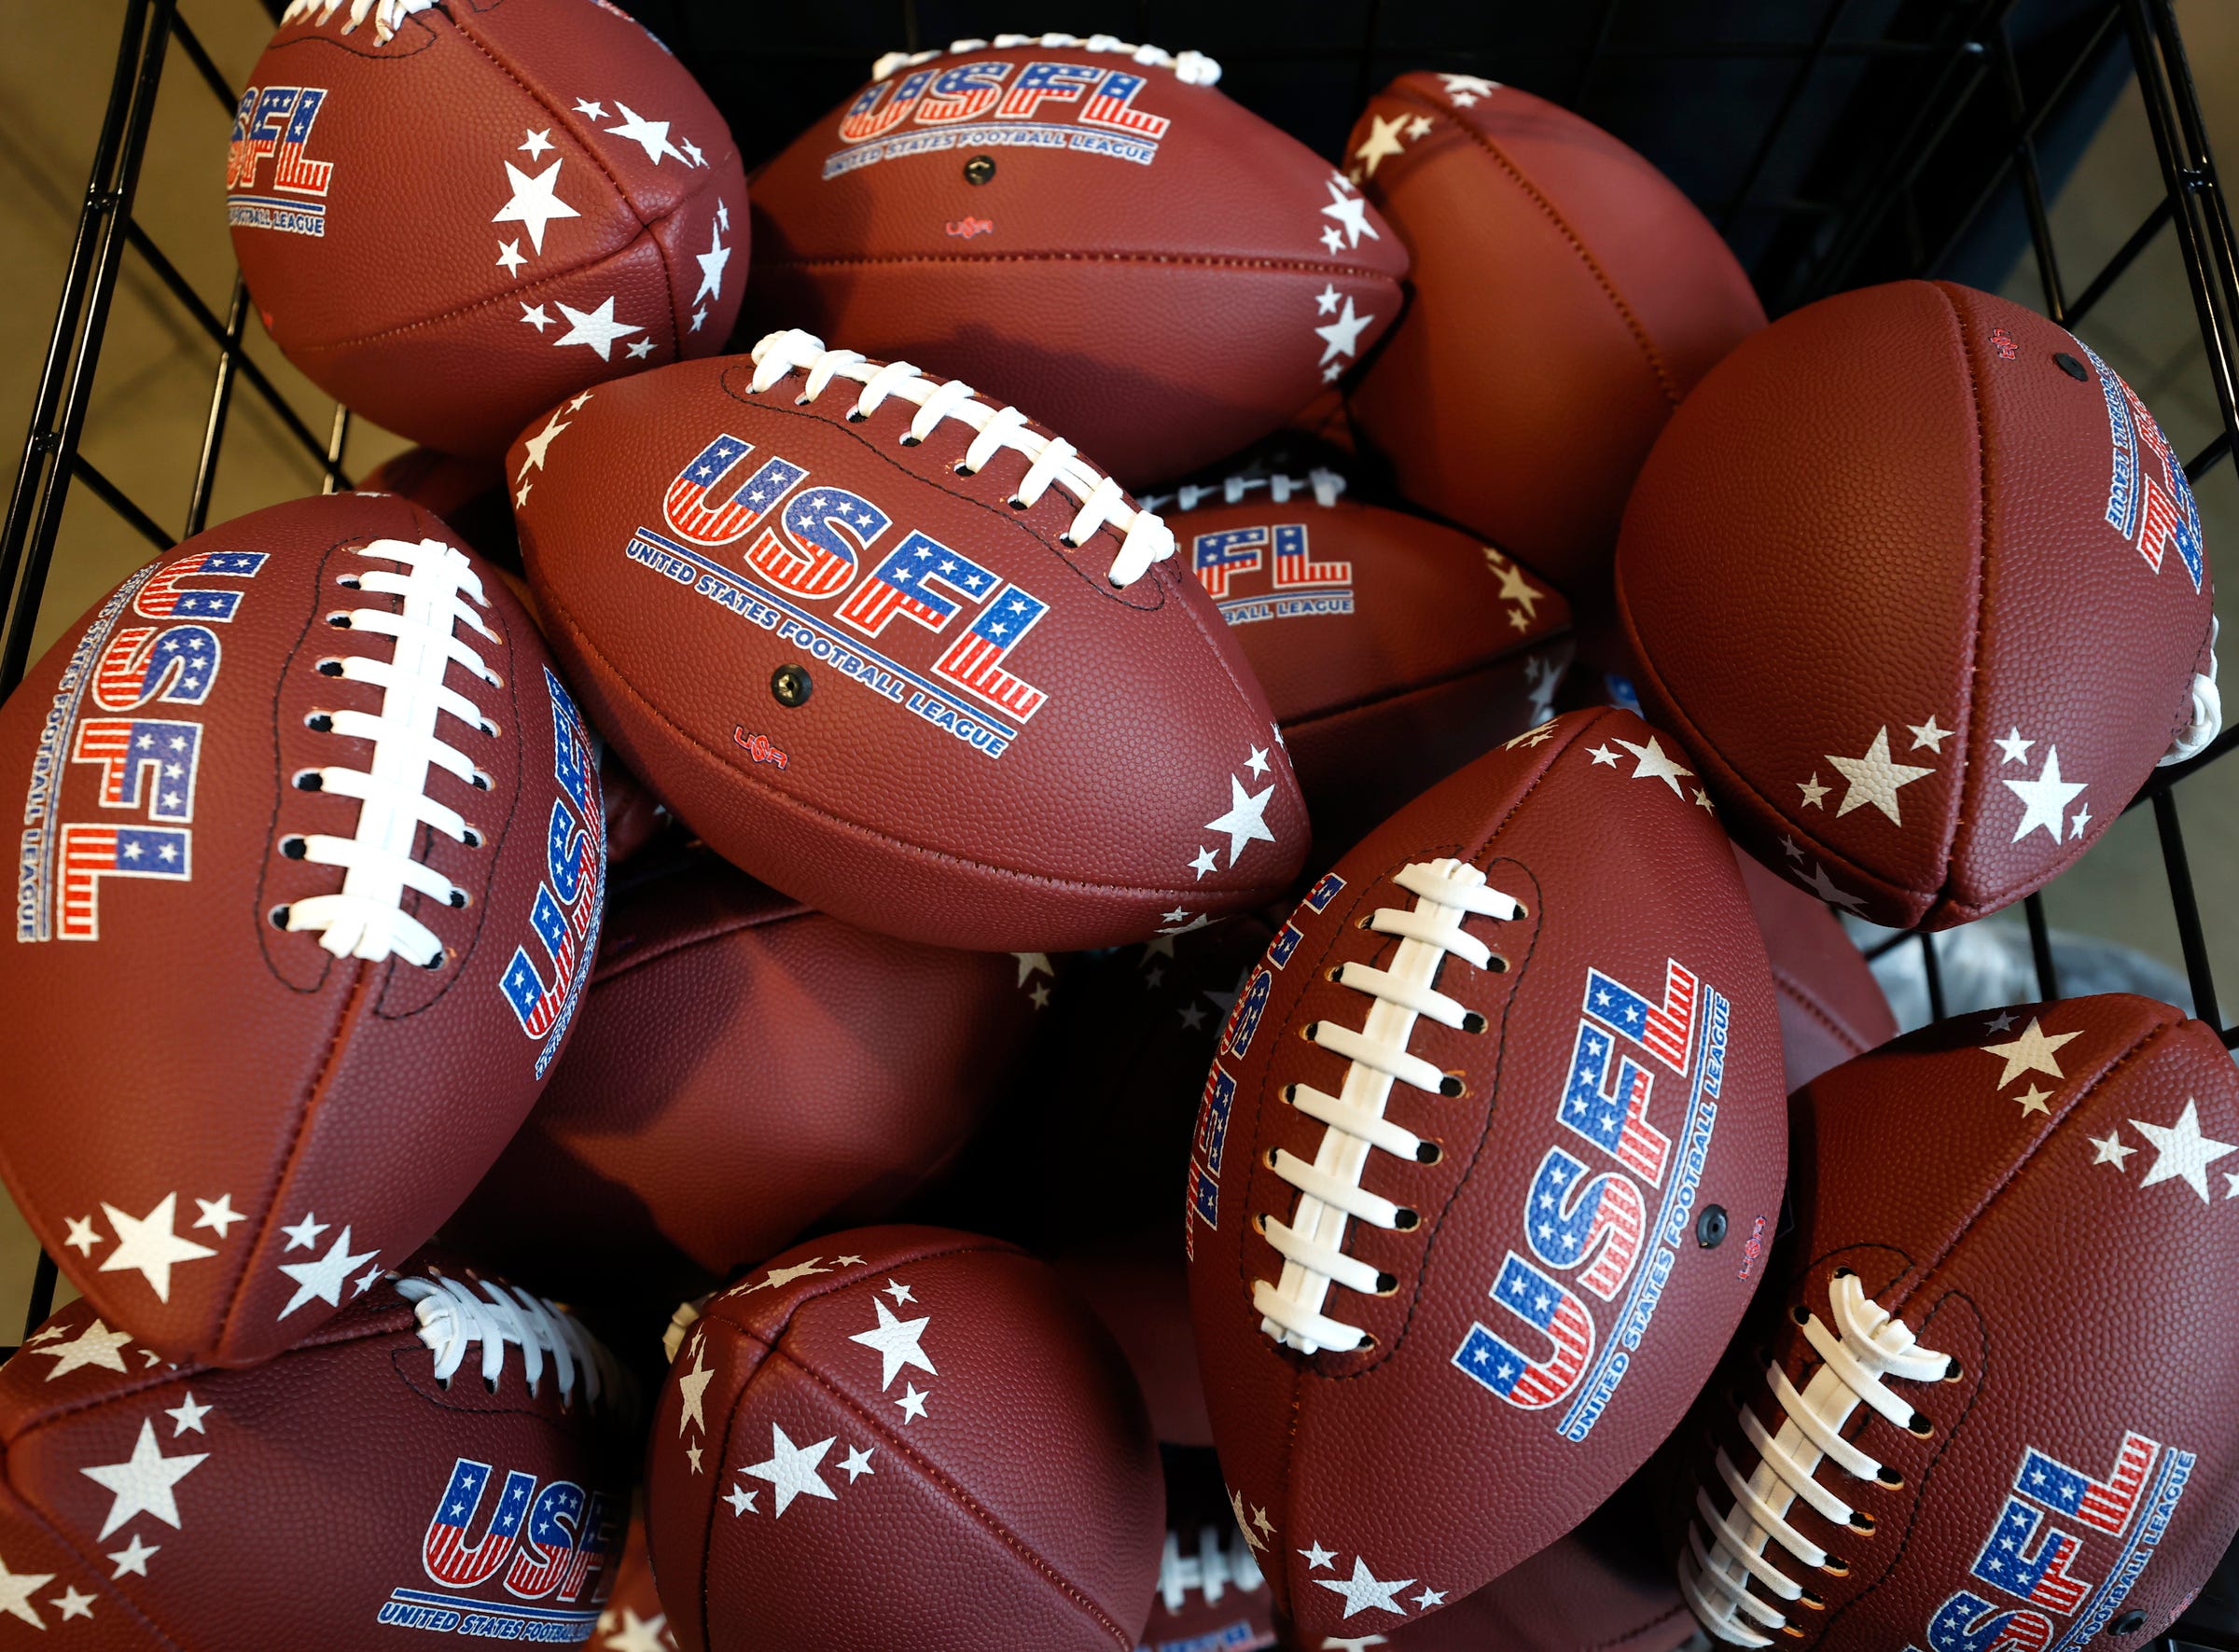 Small USFL footballs in a basket for invited guests to take after it was announced that the USFL Michigan Panthers would return back to the state playing in Detroit at Ford Field starting on April 30th during a press conference at stadium in Detroit on Thursday, Jan. 26, 2023.

Usfldetroit 012623 Es01